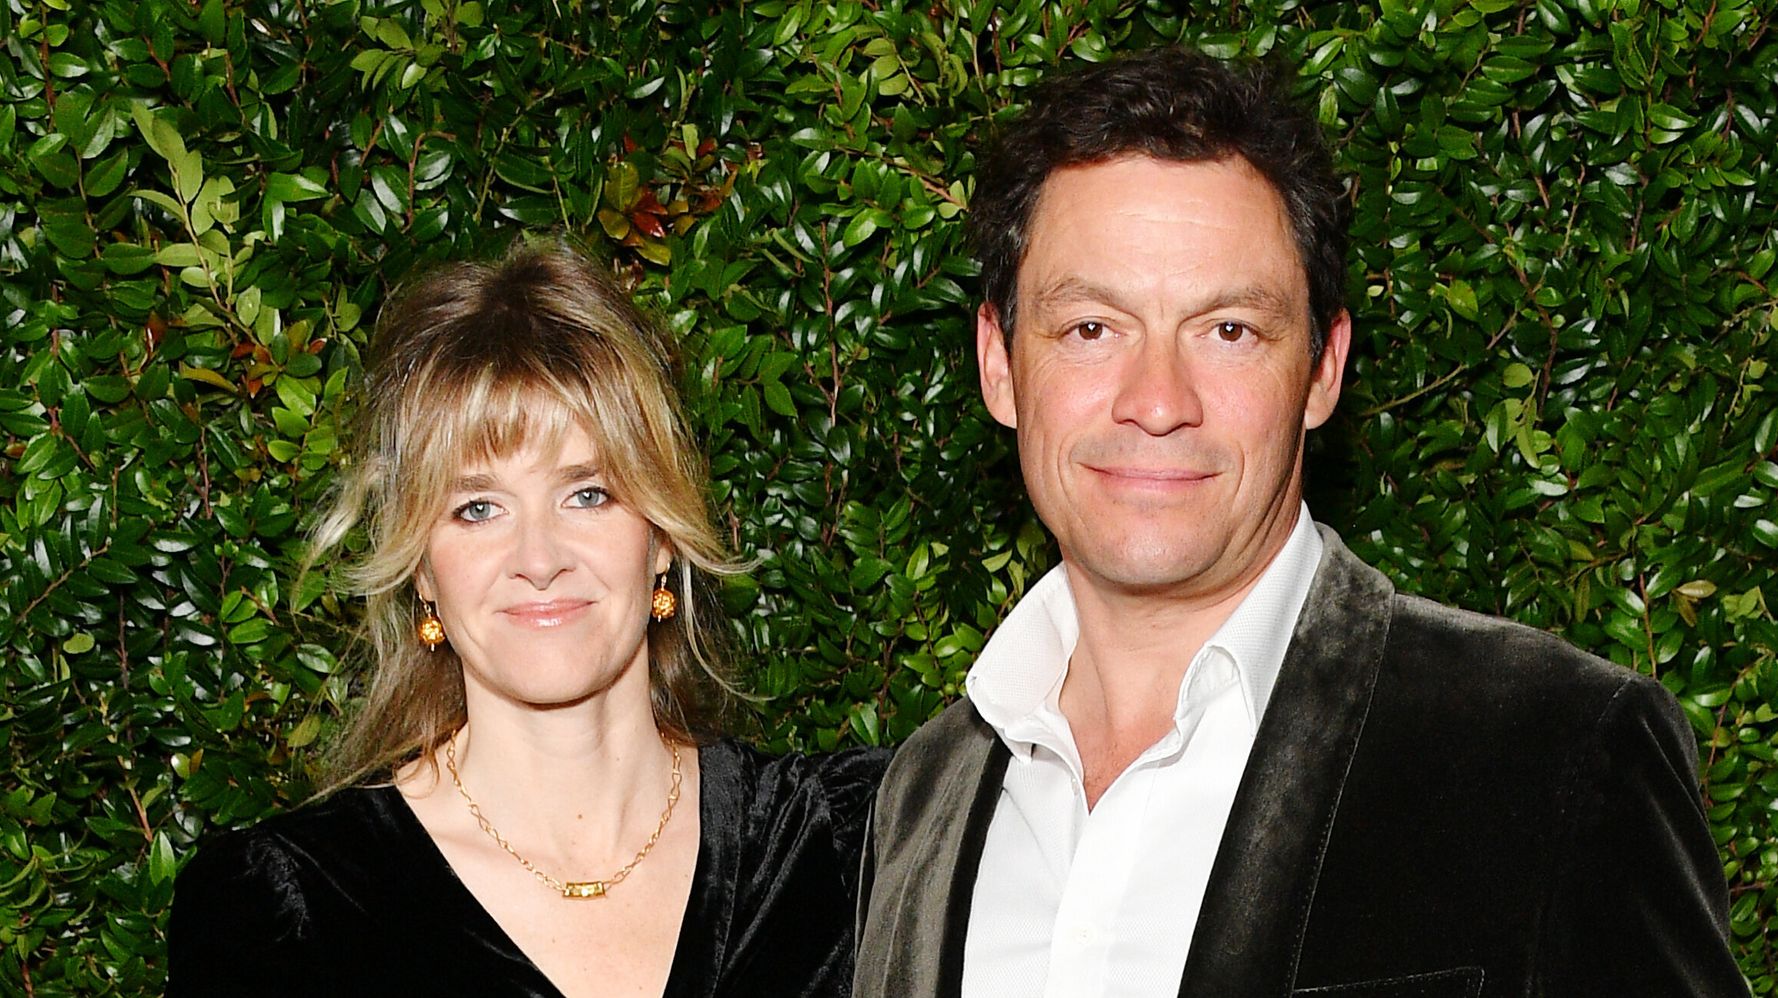 Dominic West And Wife Shut Down Lily James Affair Rumors With Note and Kiss